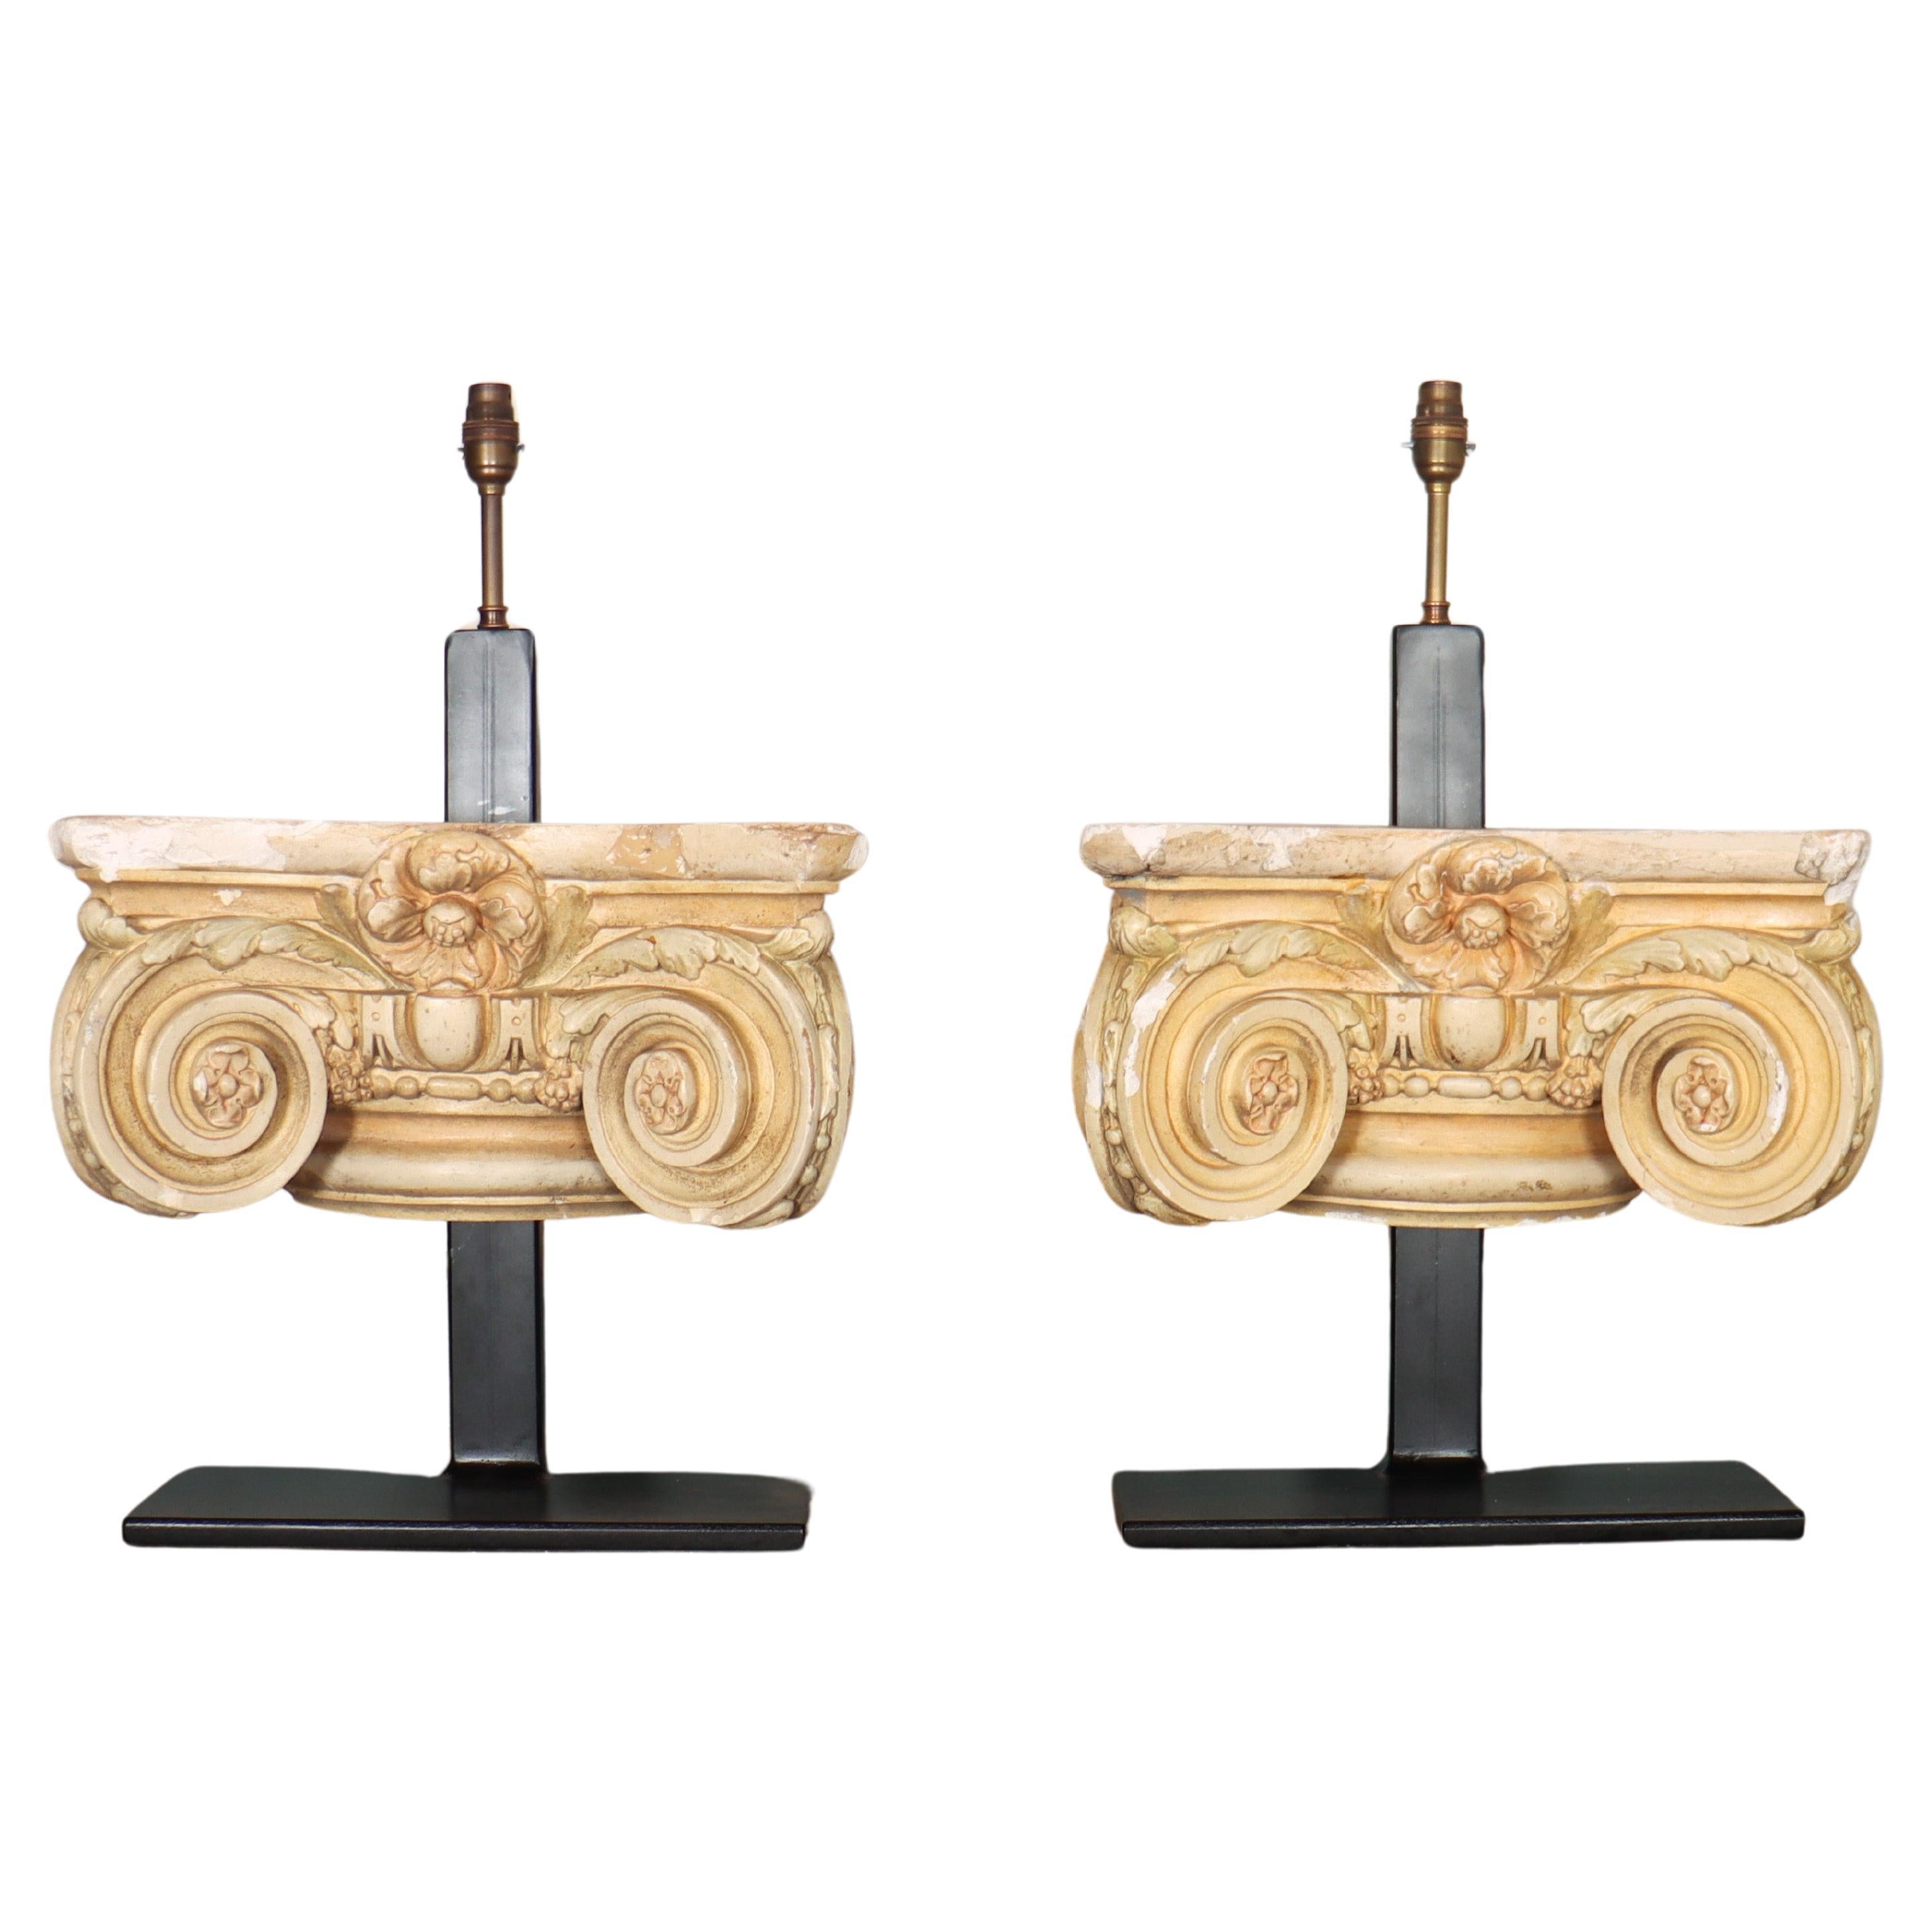 Pair of Capital Table Lamps